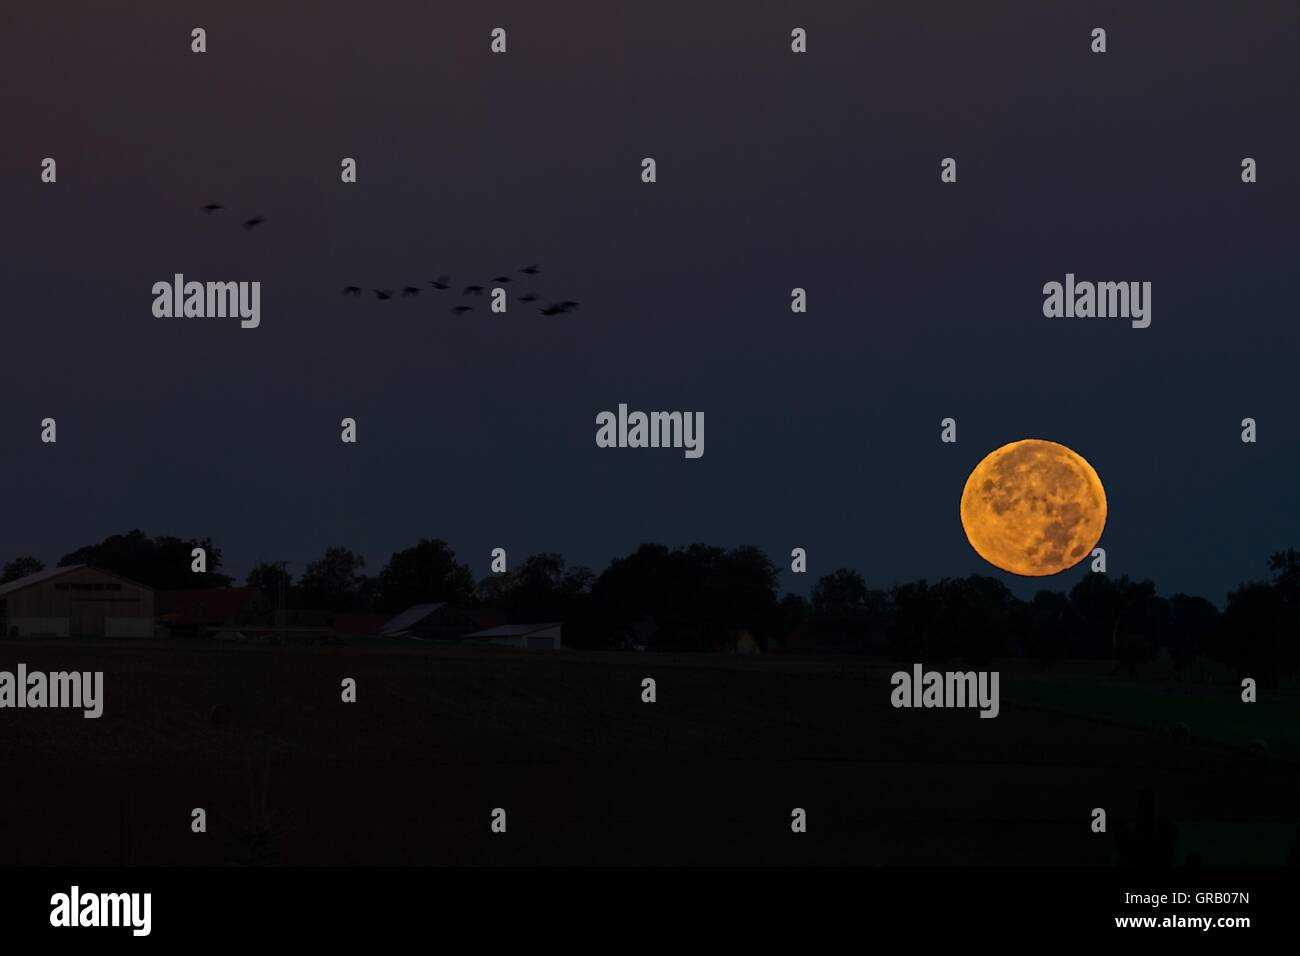 Moonset On 09 28 2015, Super Moon, With Flock Of Birds In The Early Morning Stock Photo